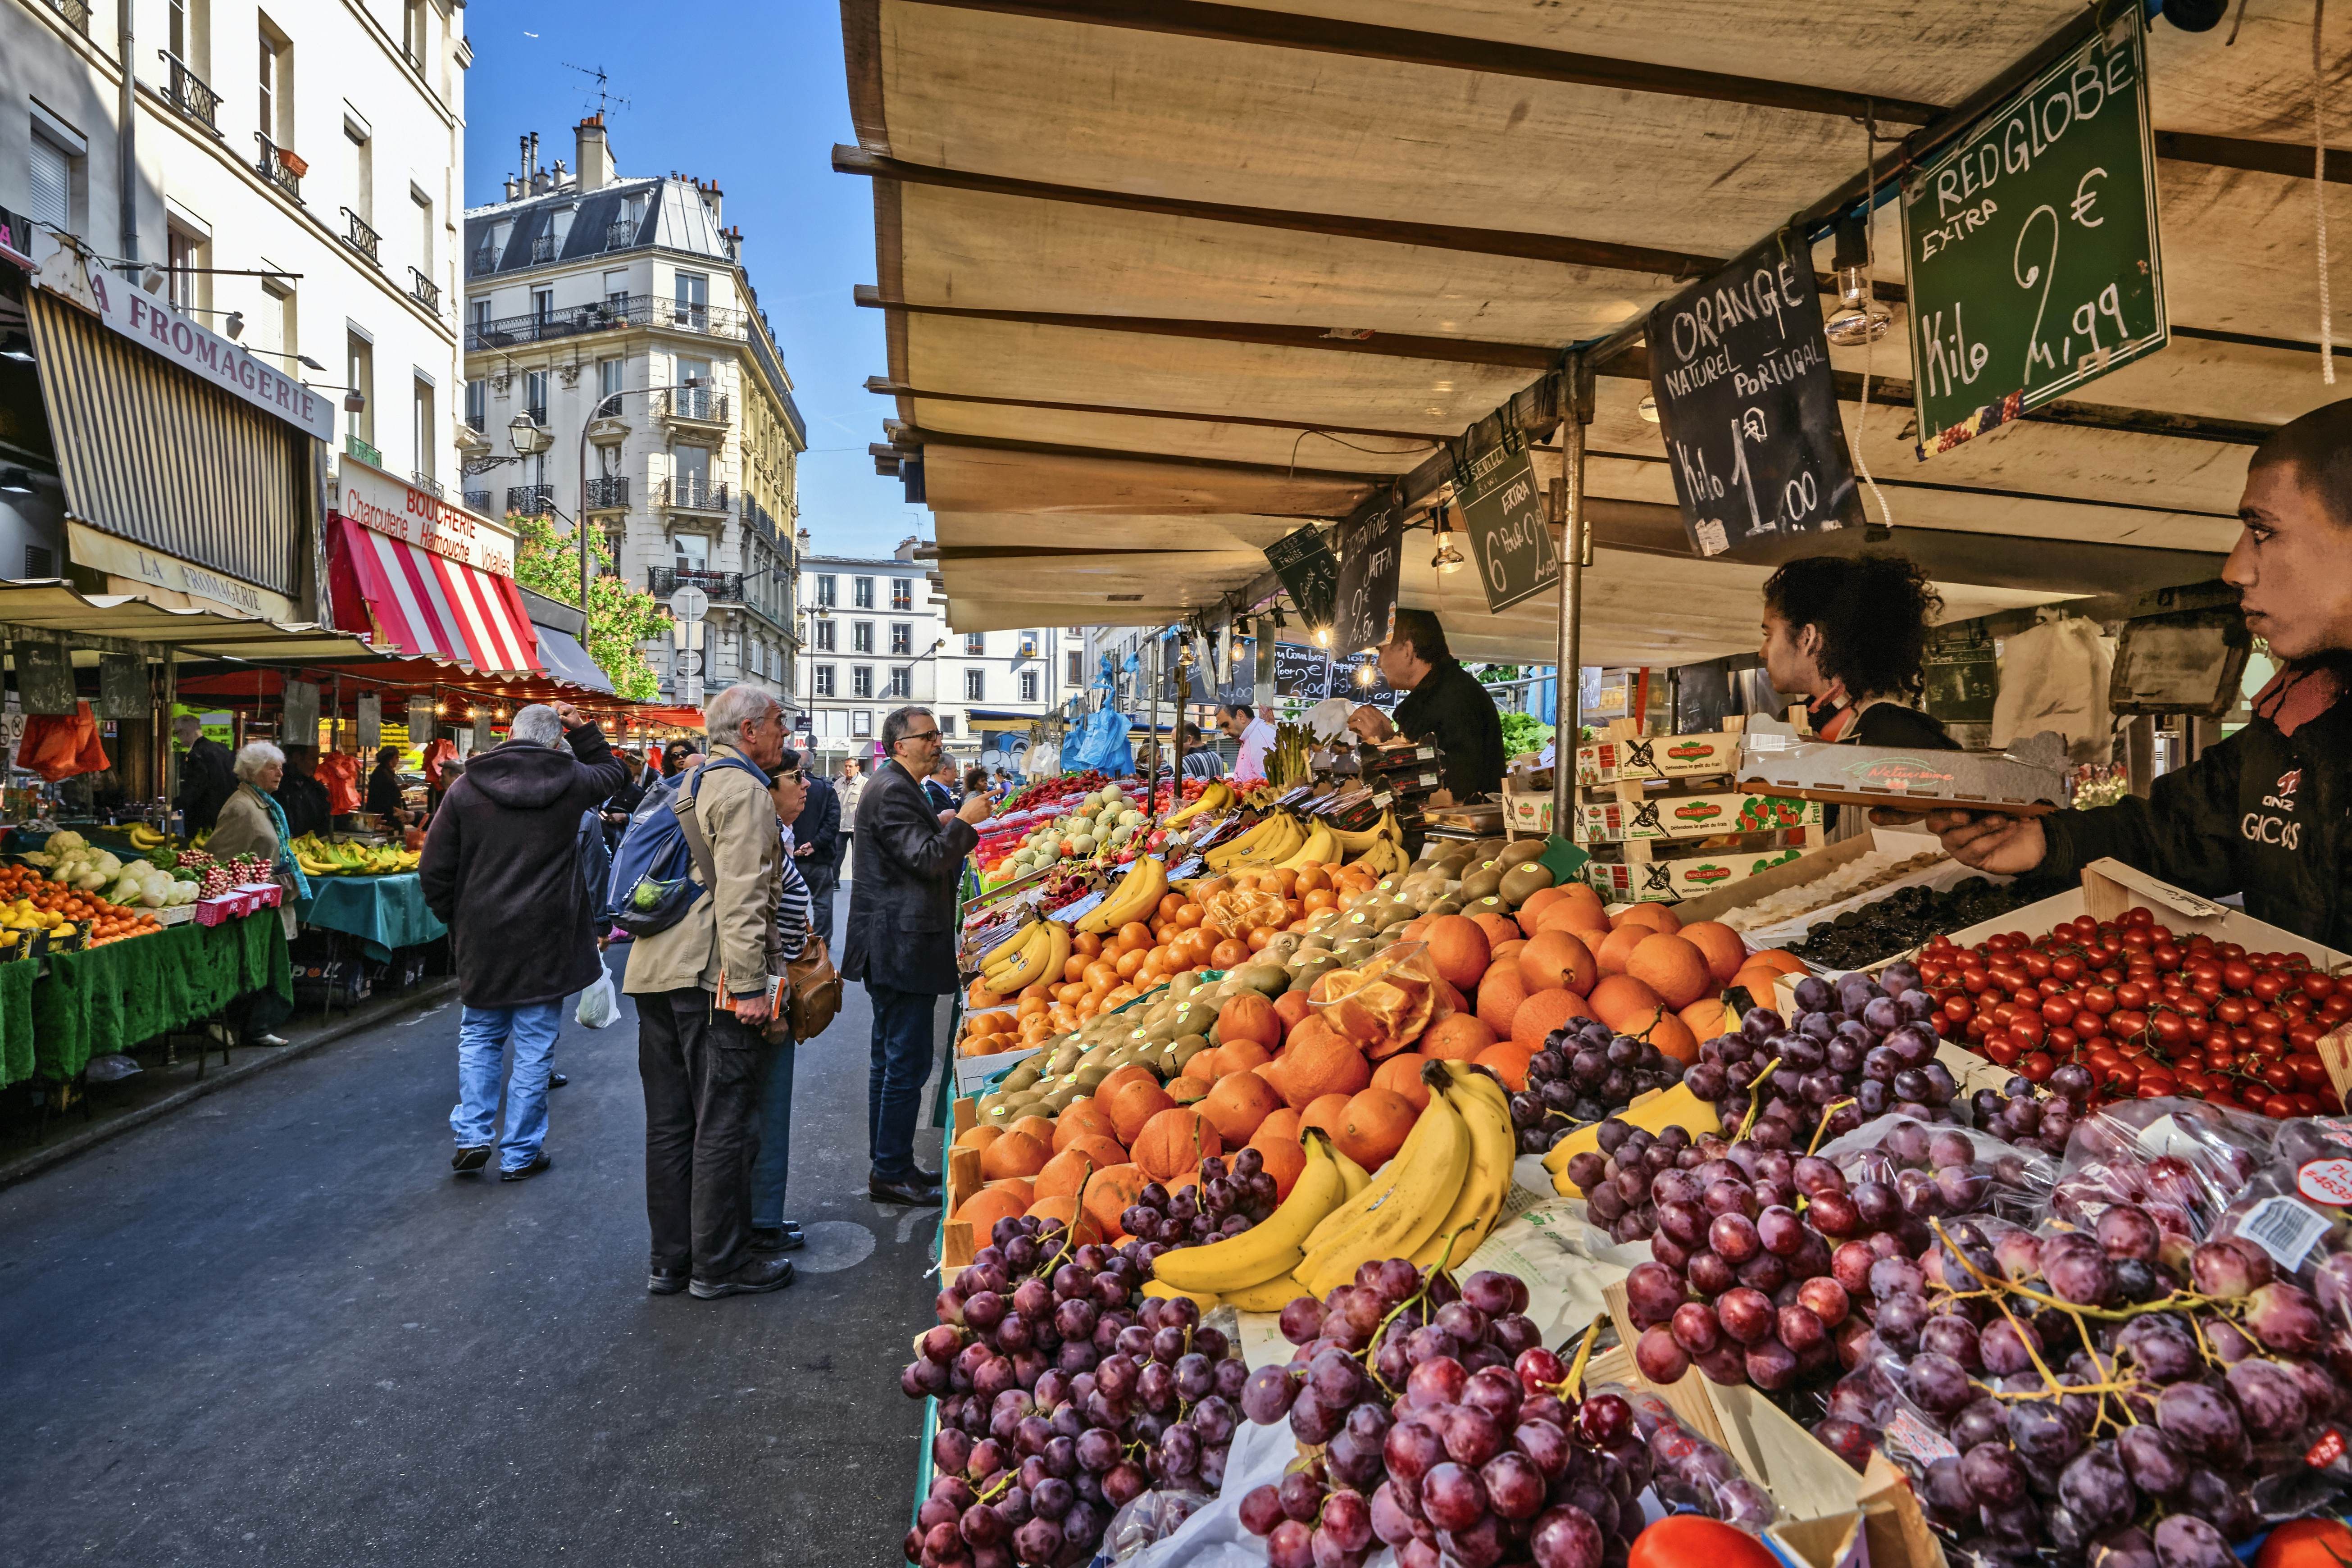 The best shopping in Paris: 10 traditional shops where you can buy